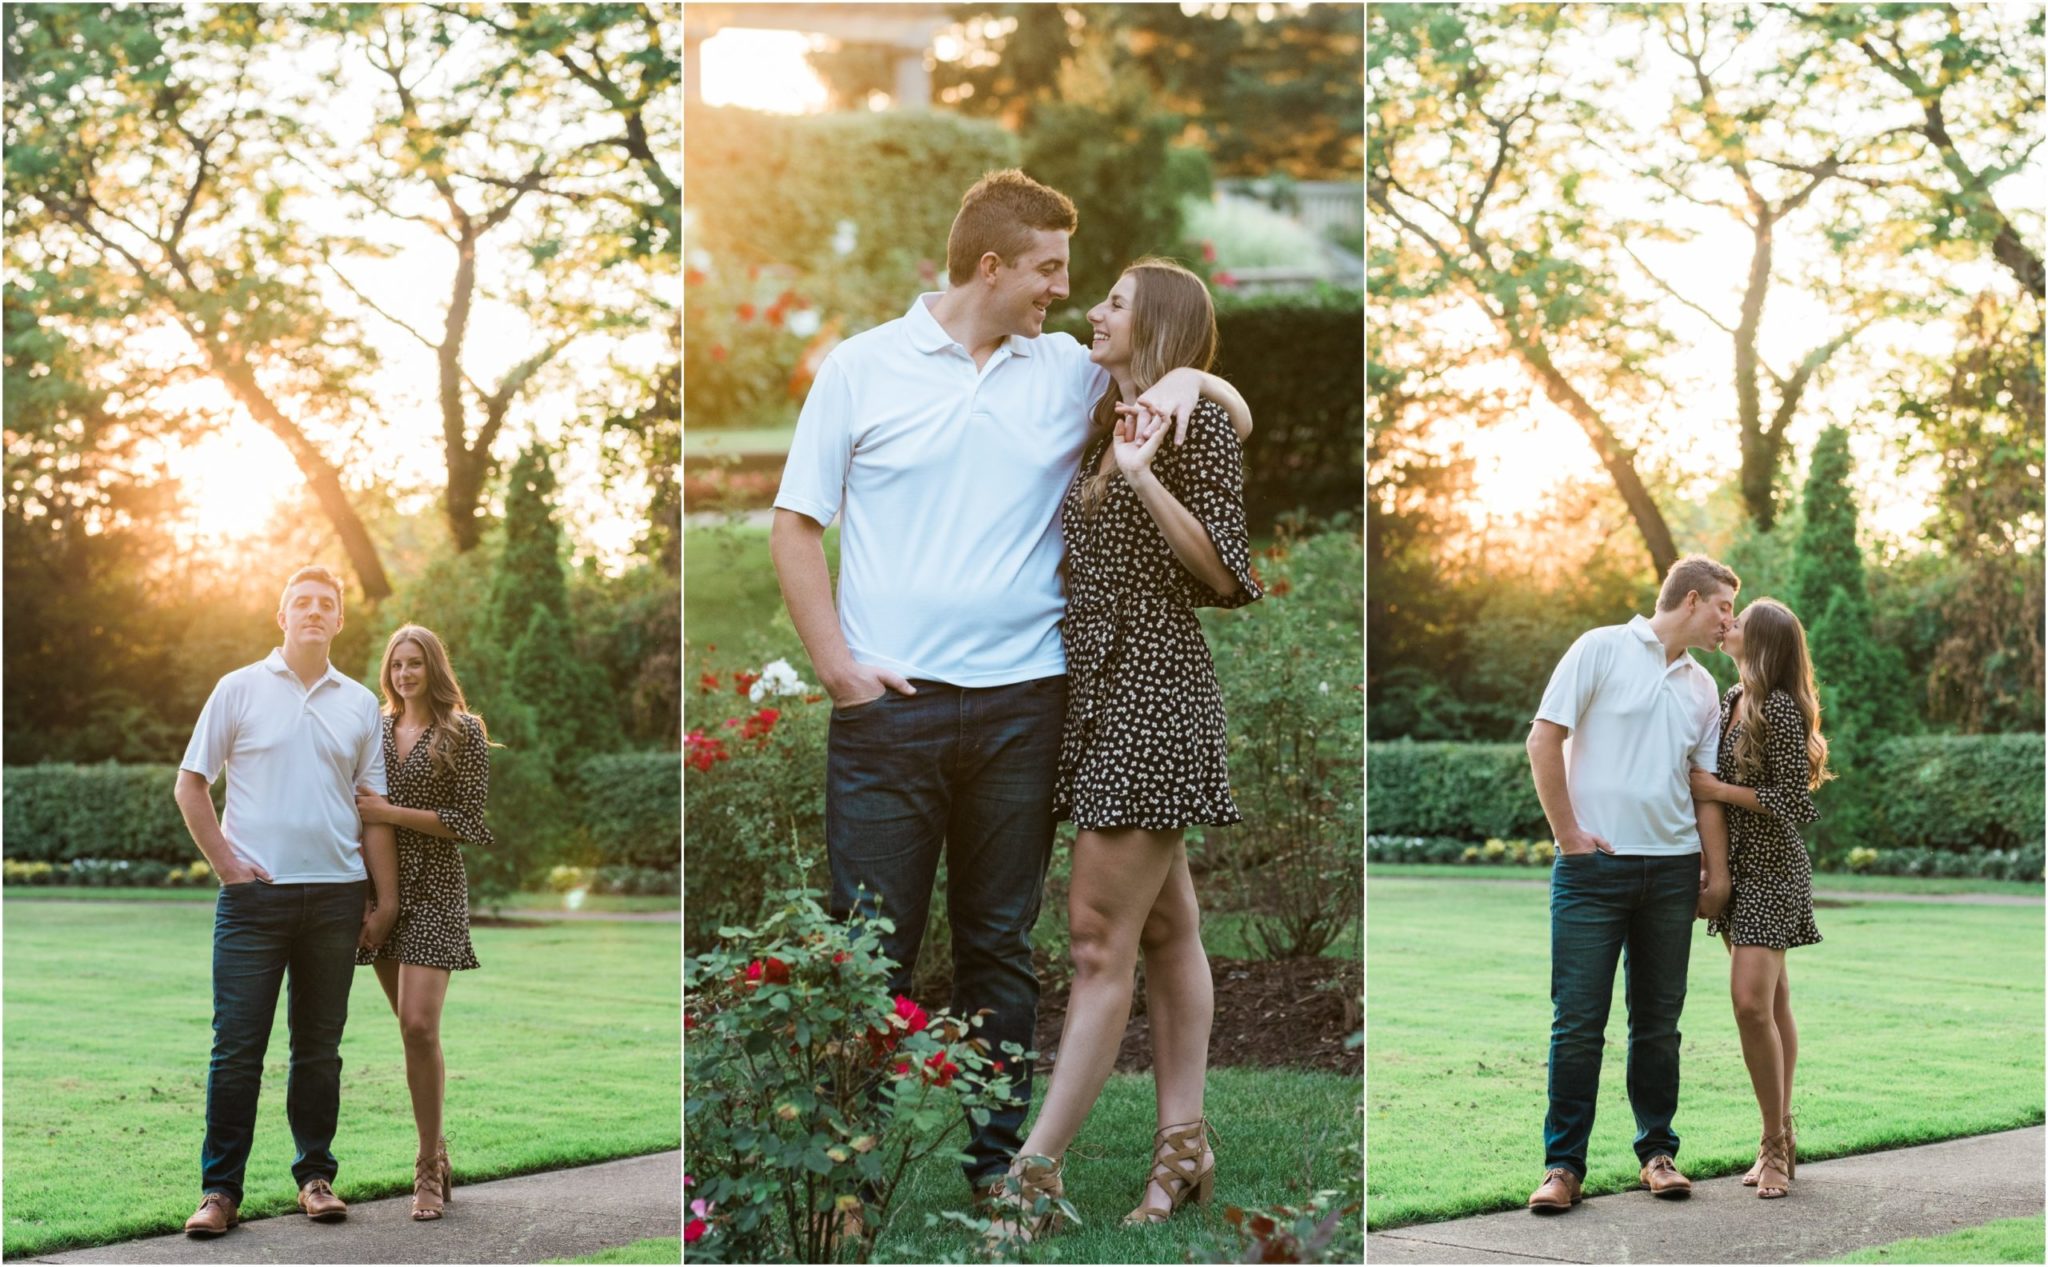 Collage image of a couple during summer in a rose garden.